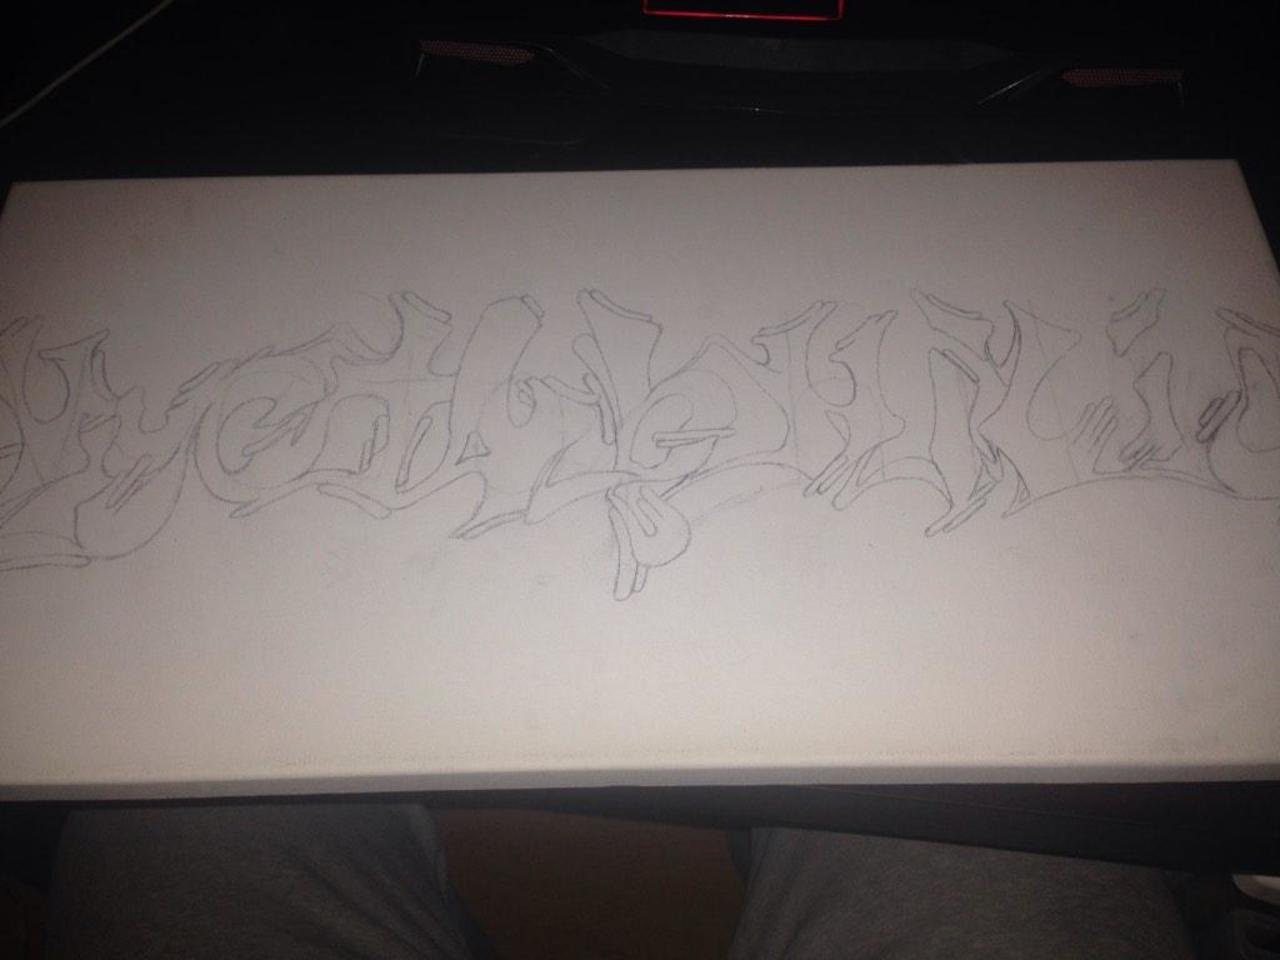 The only shitty part about late night sketches... Can never finish them #art #graffiti http://t.co/ioR0hyDQuy